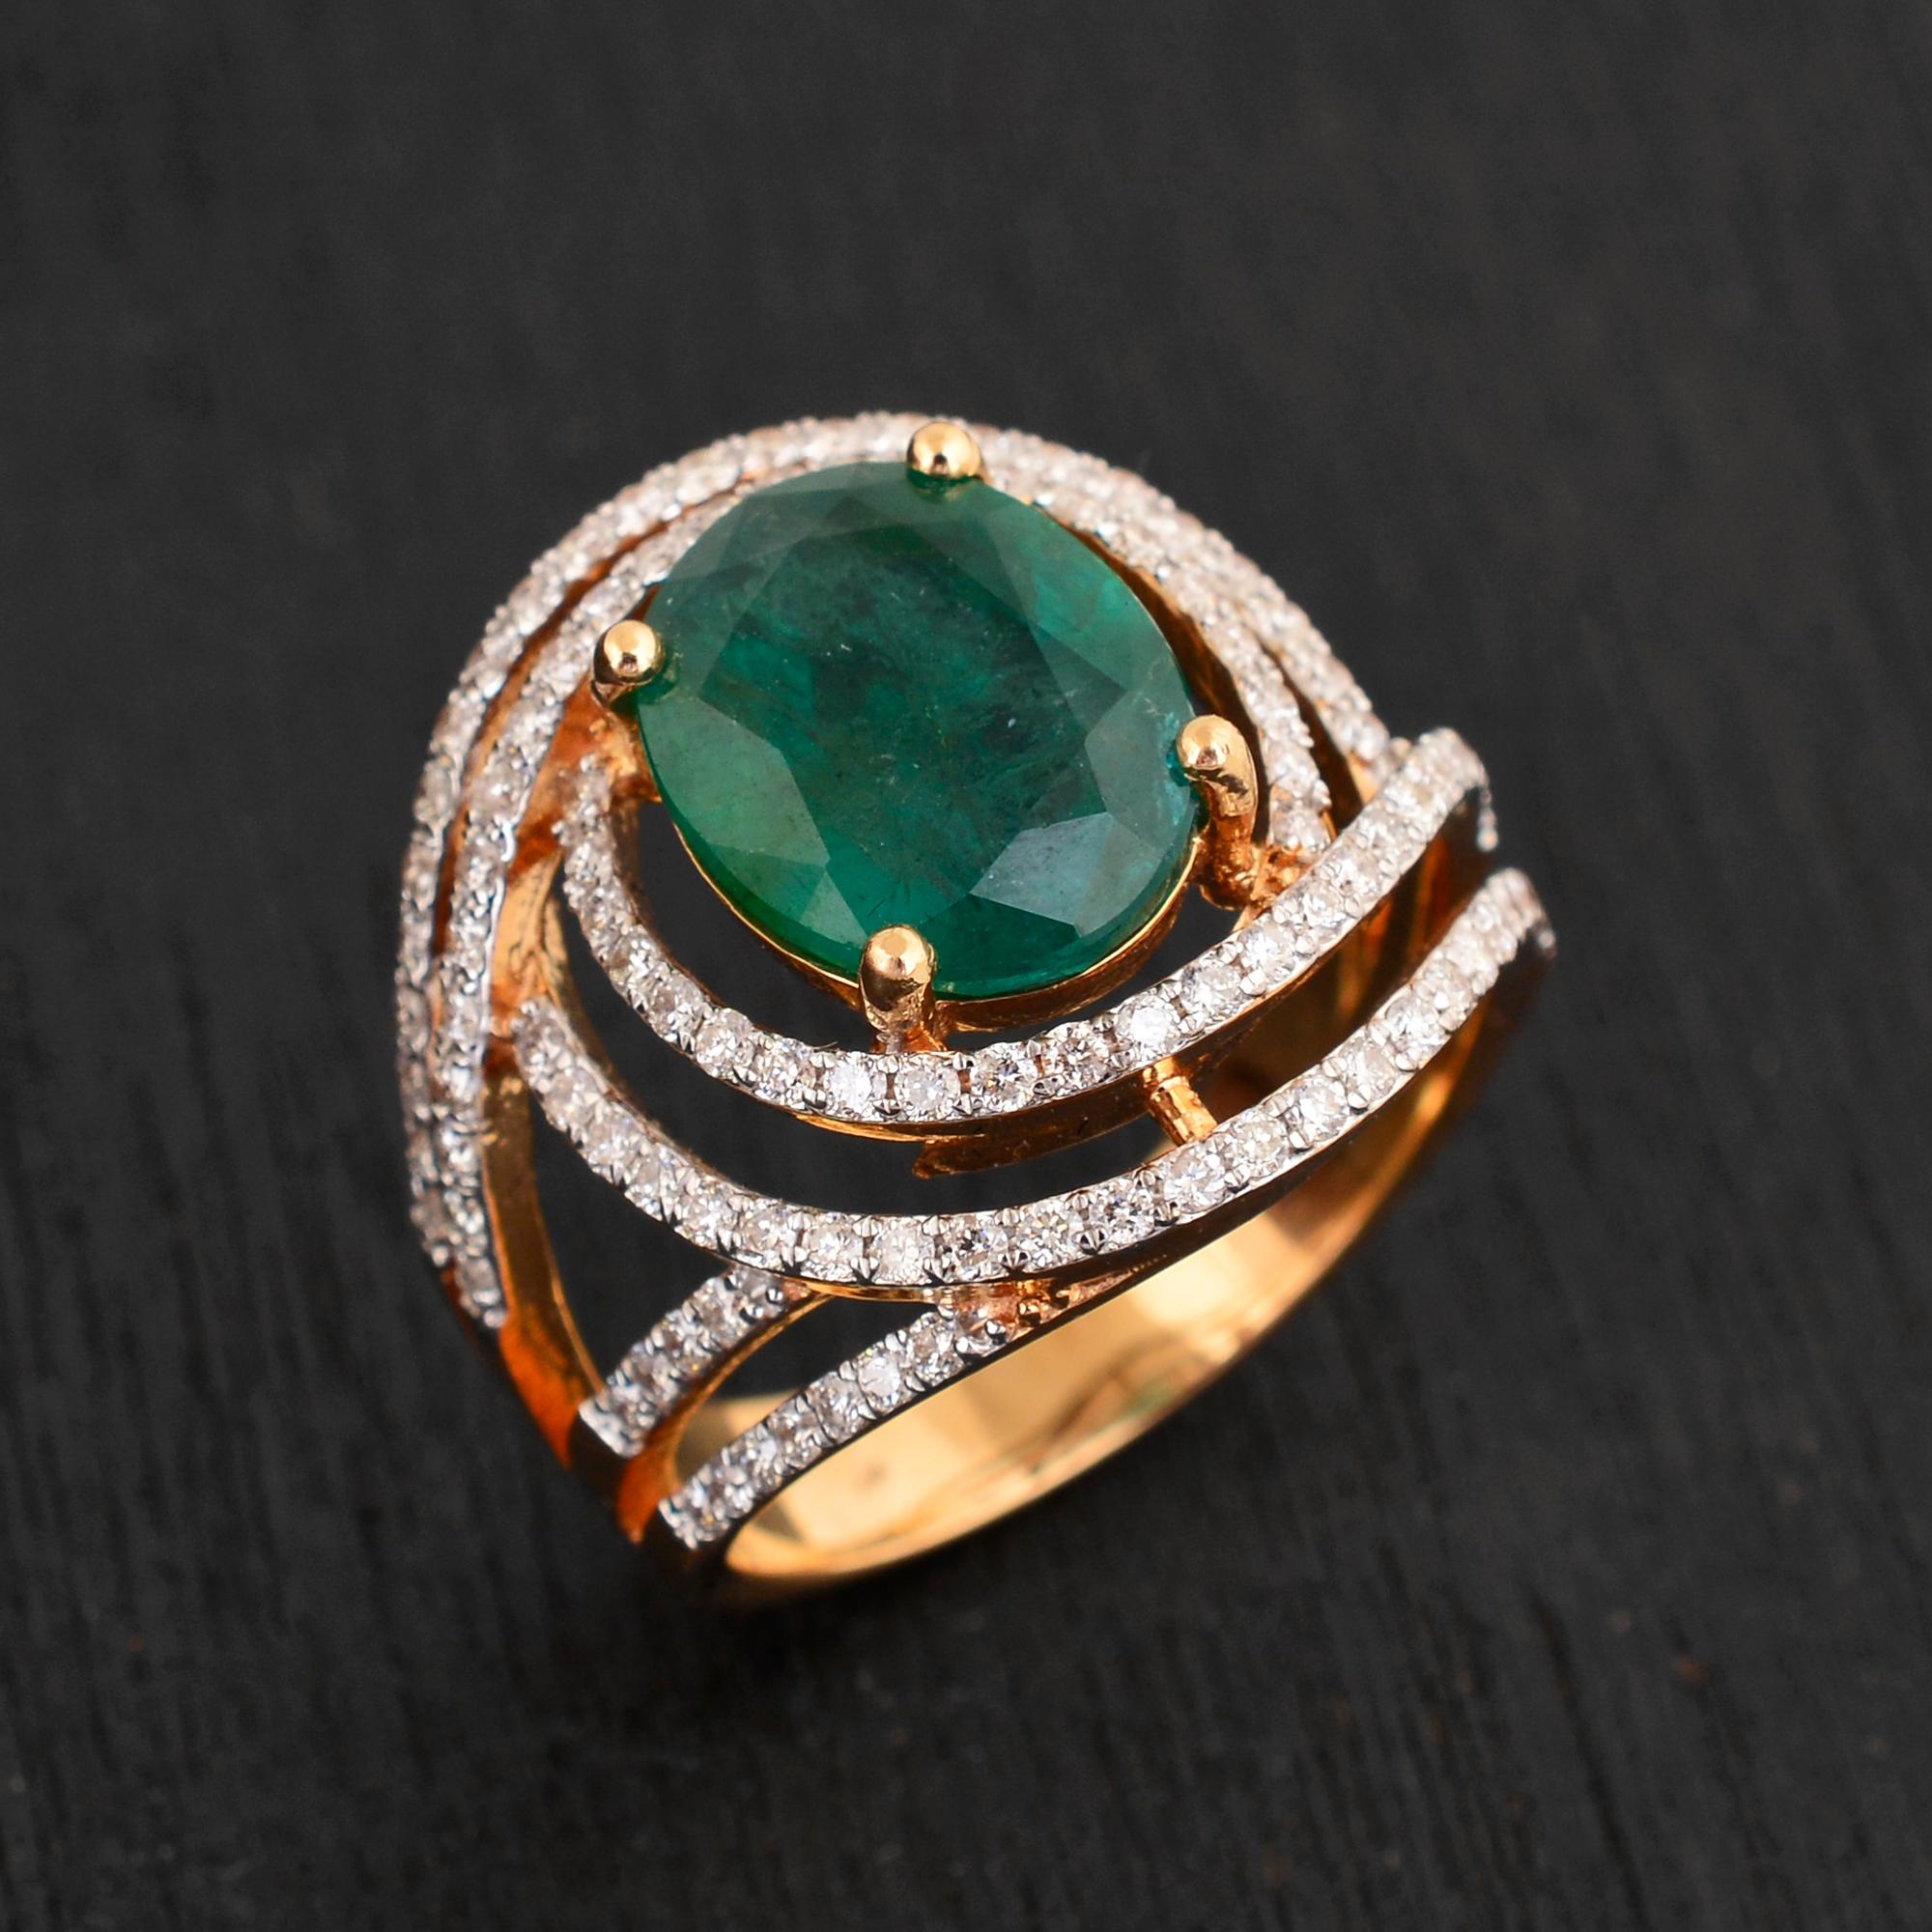 Oval Cut Oval Natural Emerald Gemstone Ring Diamond Pave 14k Yellow Gold Fine Jewelry For Sale